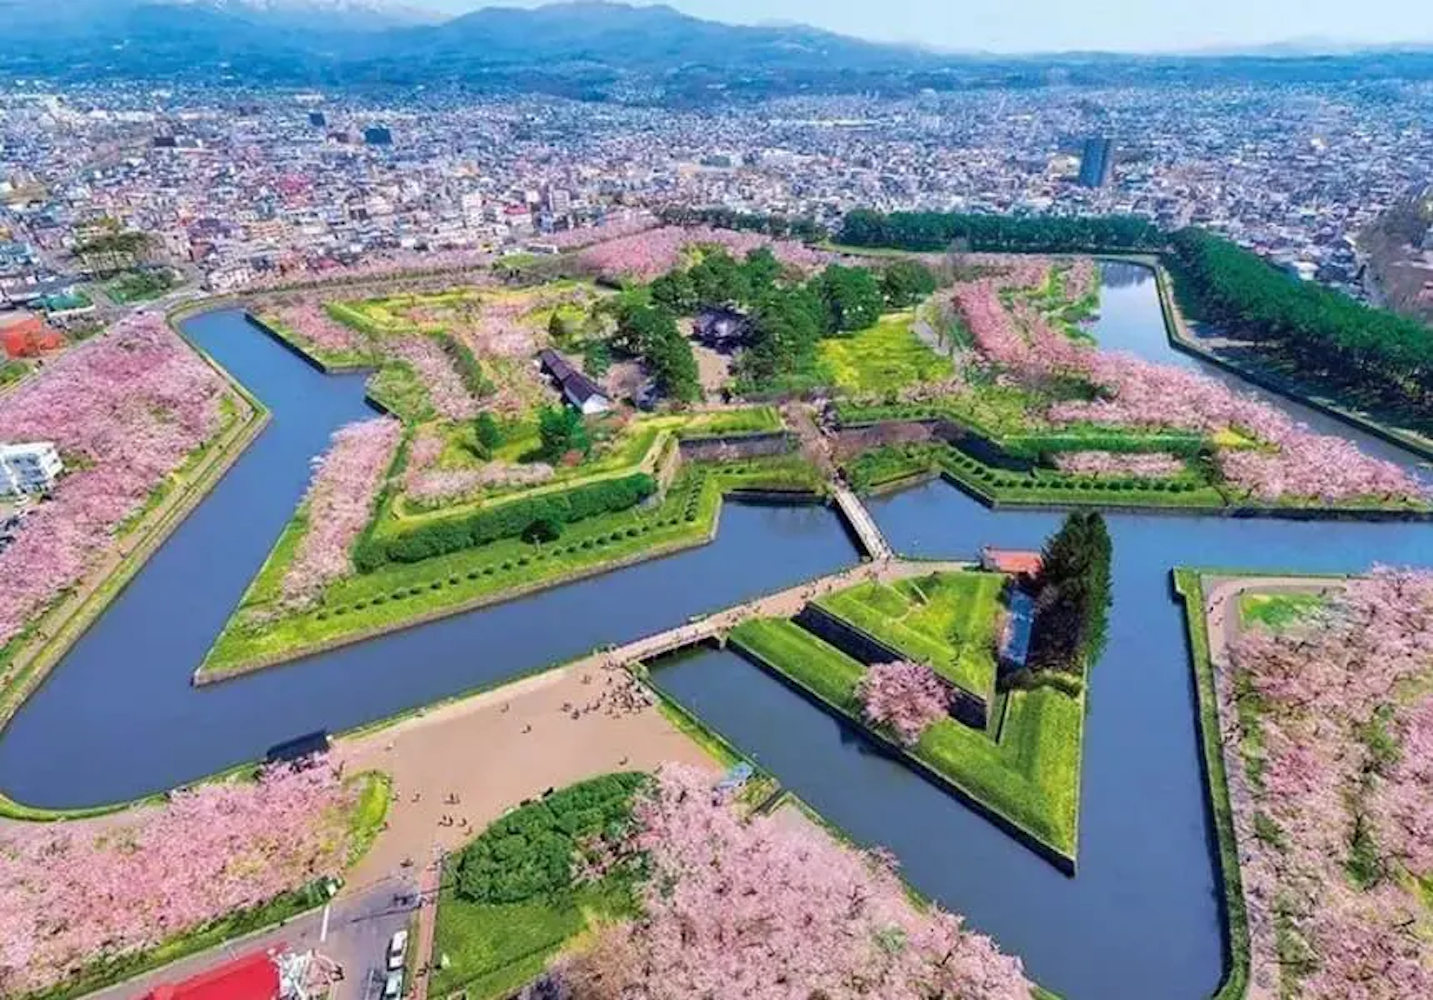 An aerial view of Hakodate City Fort Goryokaku, where the cherry blossoms are in full bloom, creating a picturesque scene.